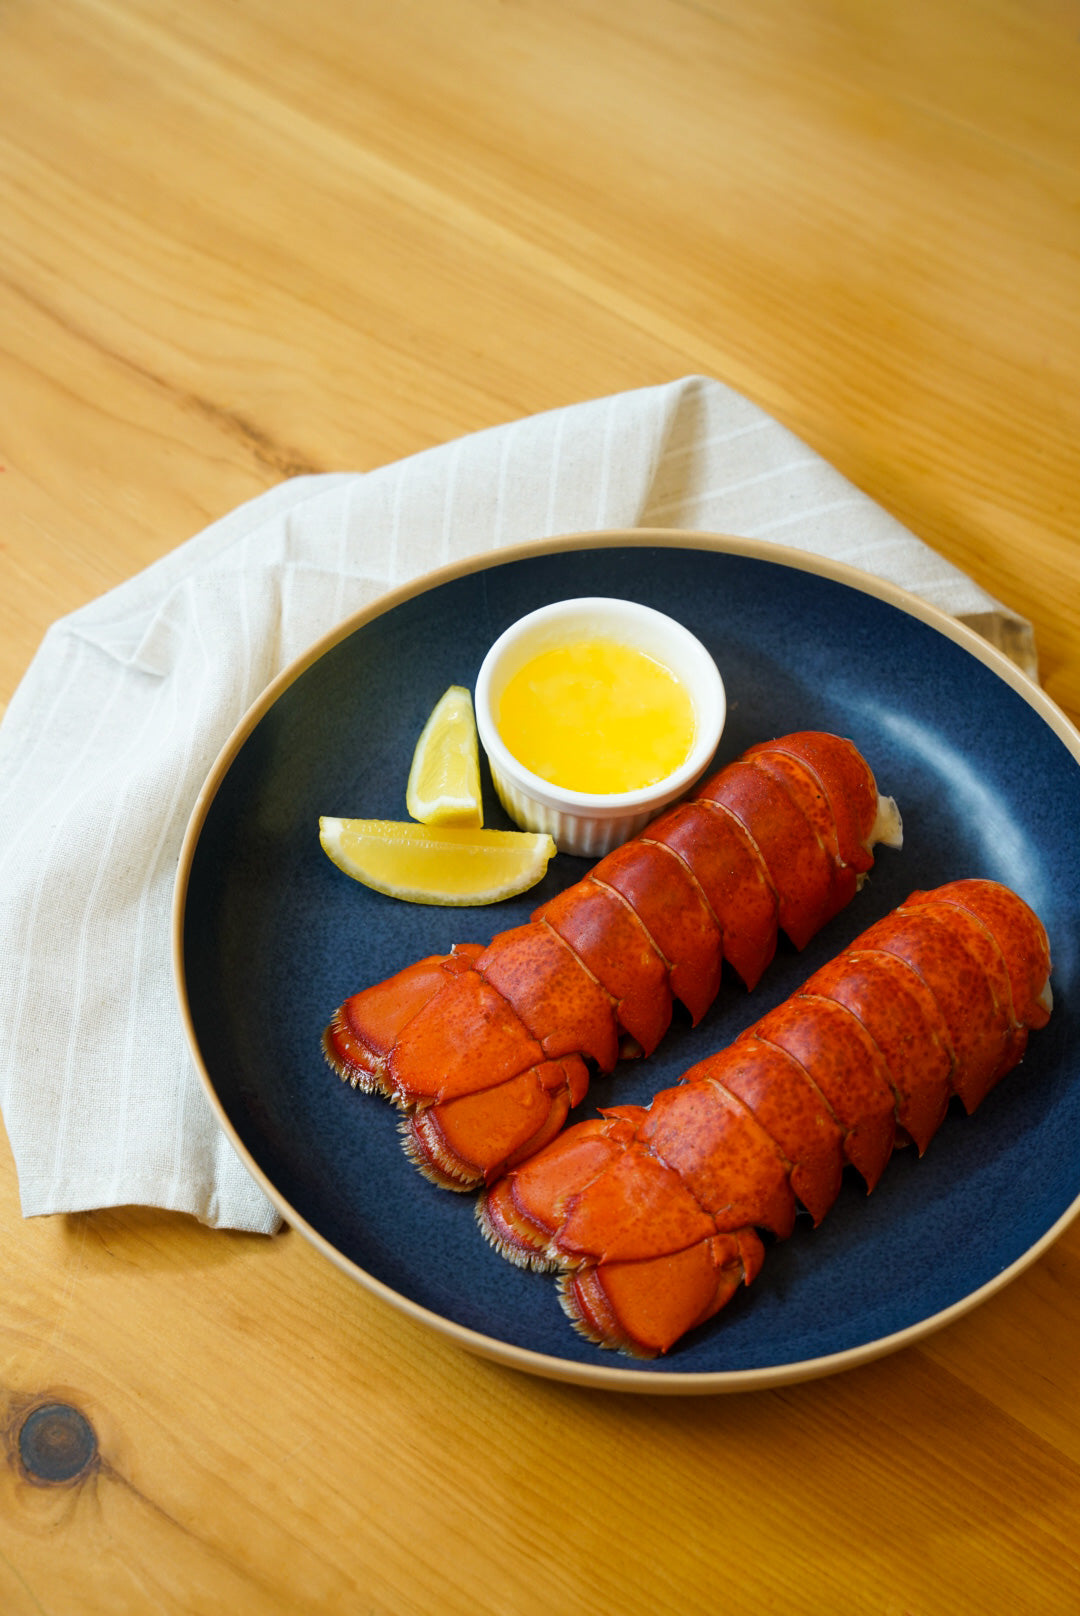 4-5oz. Maine Lobster Tail